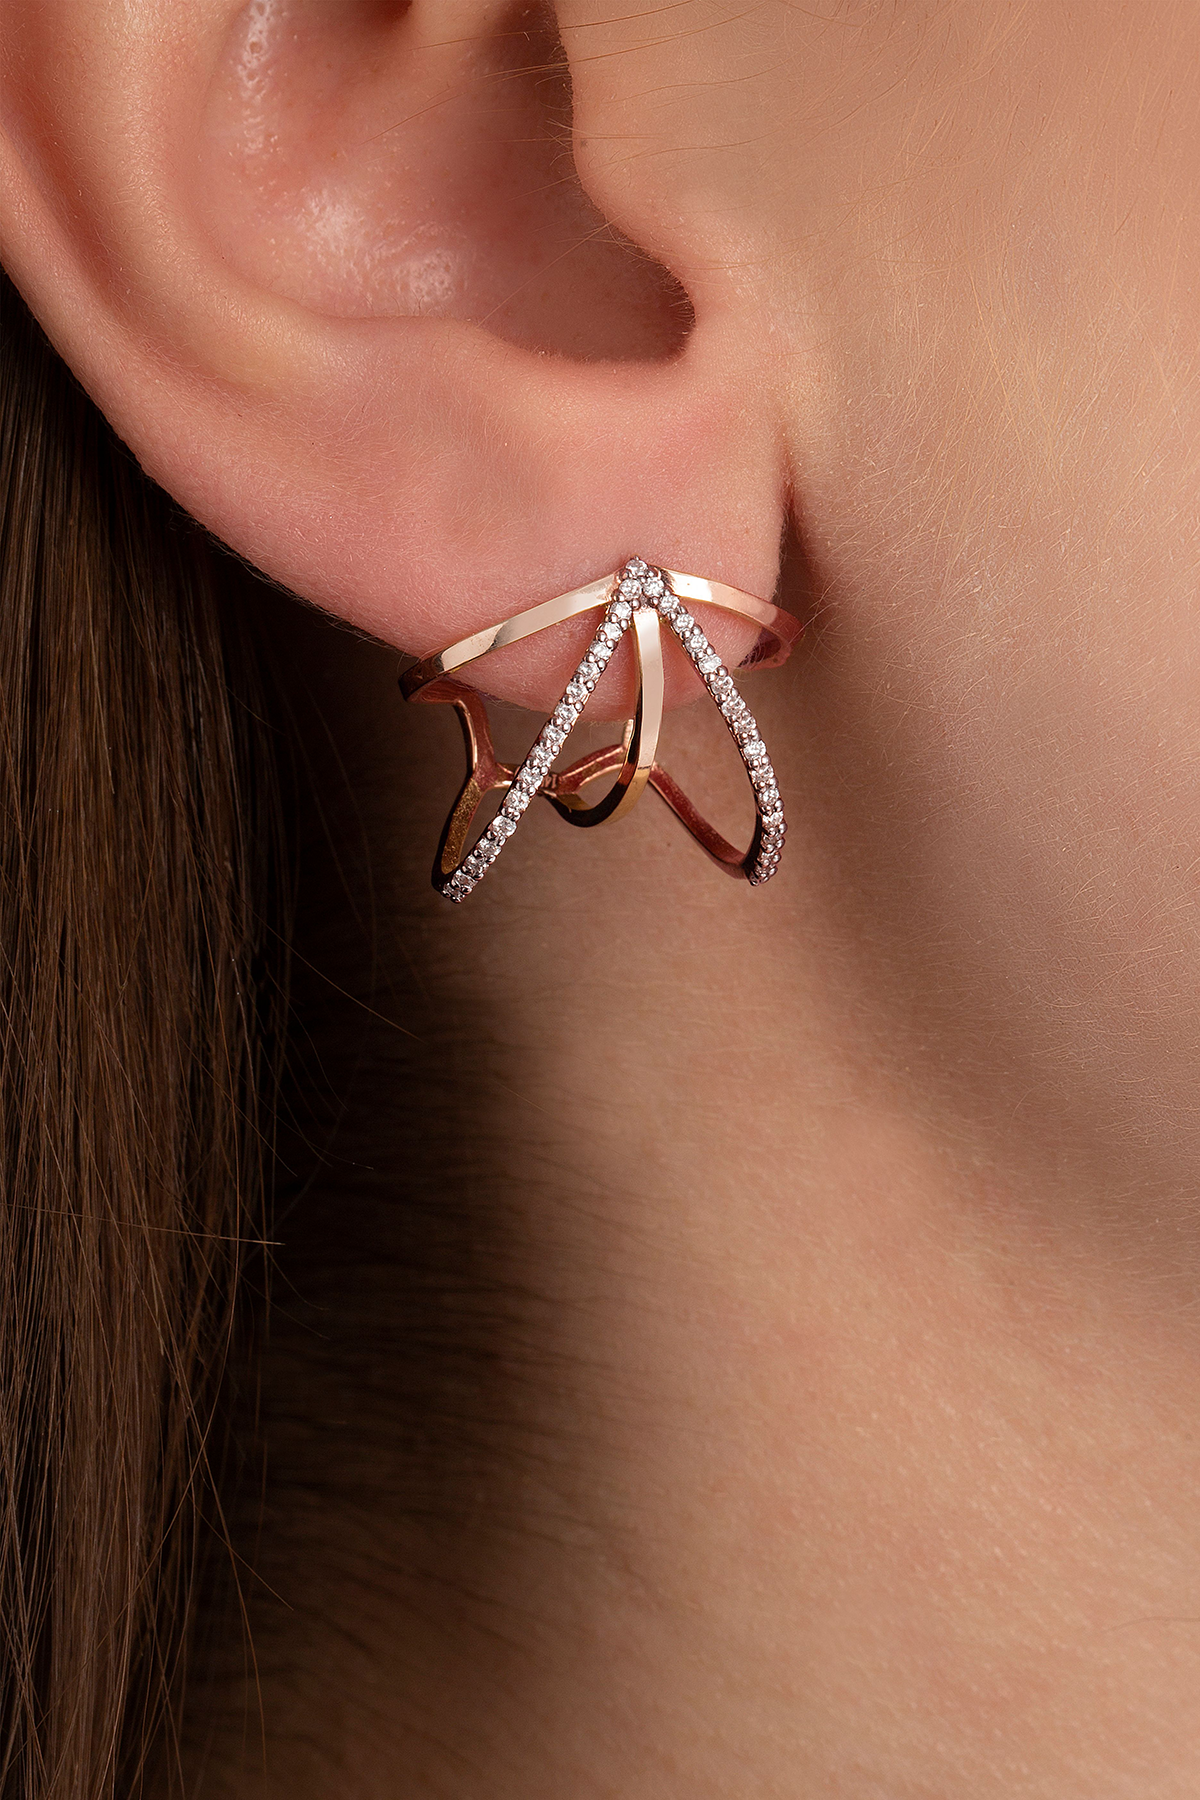 Pentapus Diamond Earcage in Rose Gold - Her Story Shop